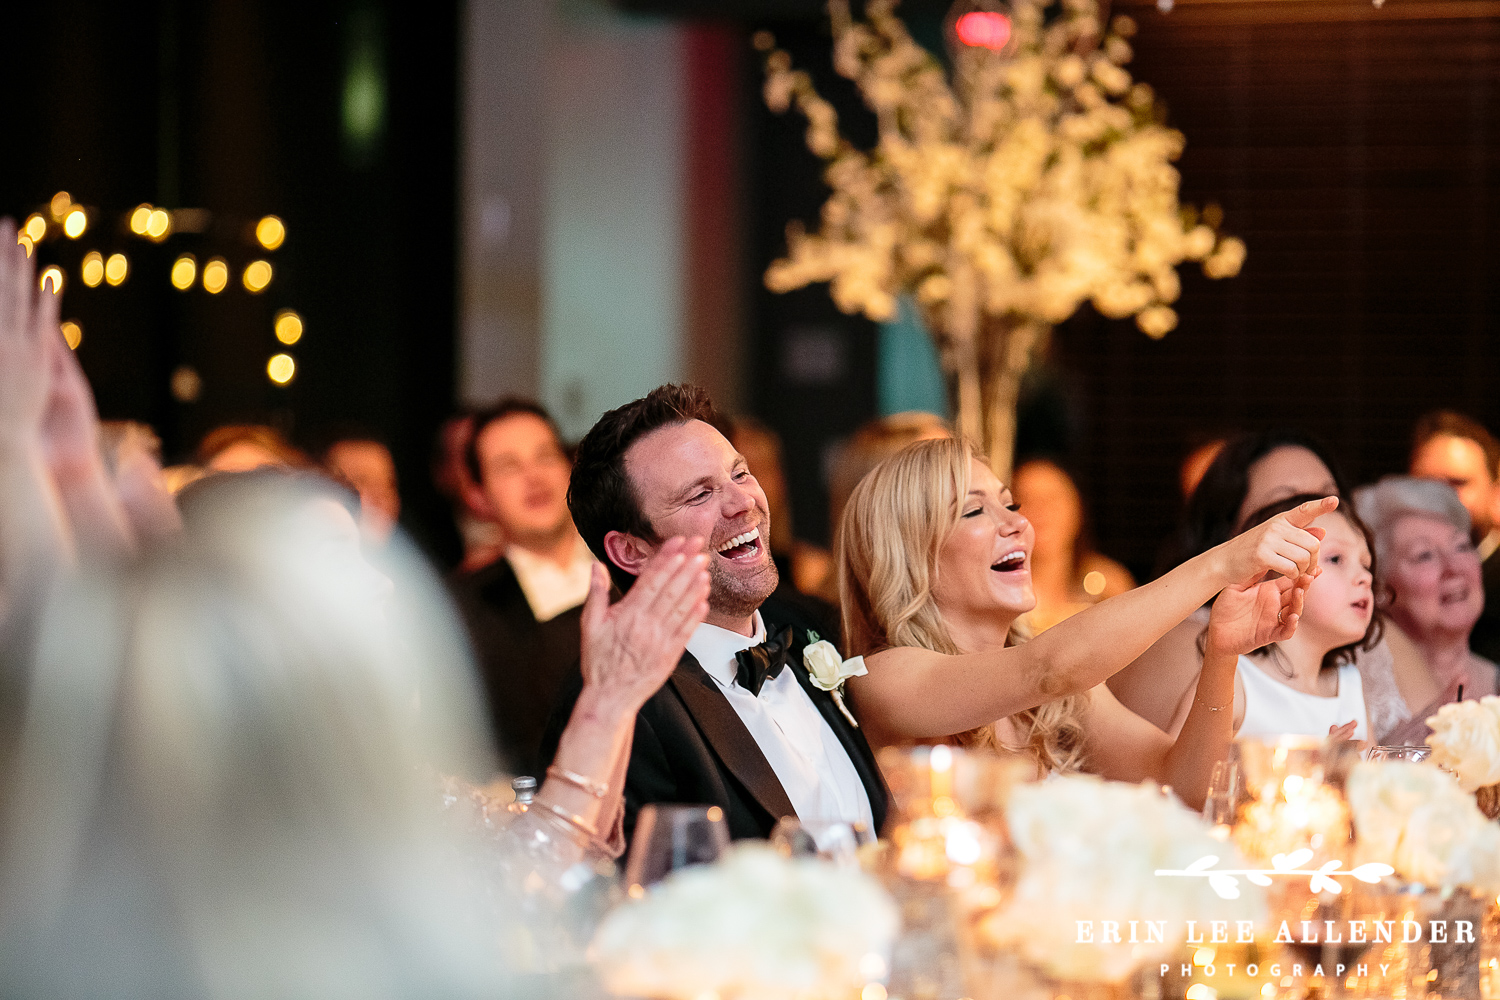 Bride_Groom_Laugh_At_Toasts